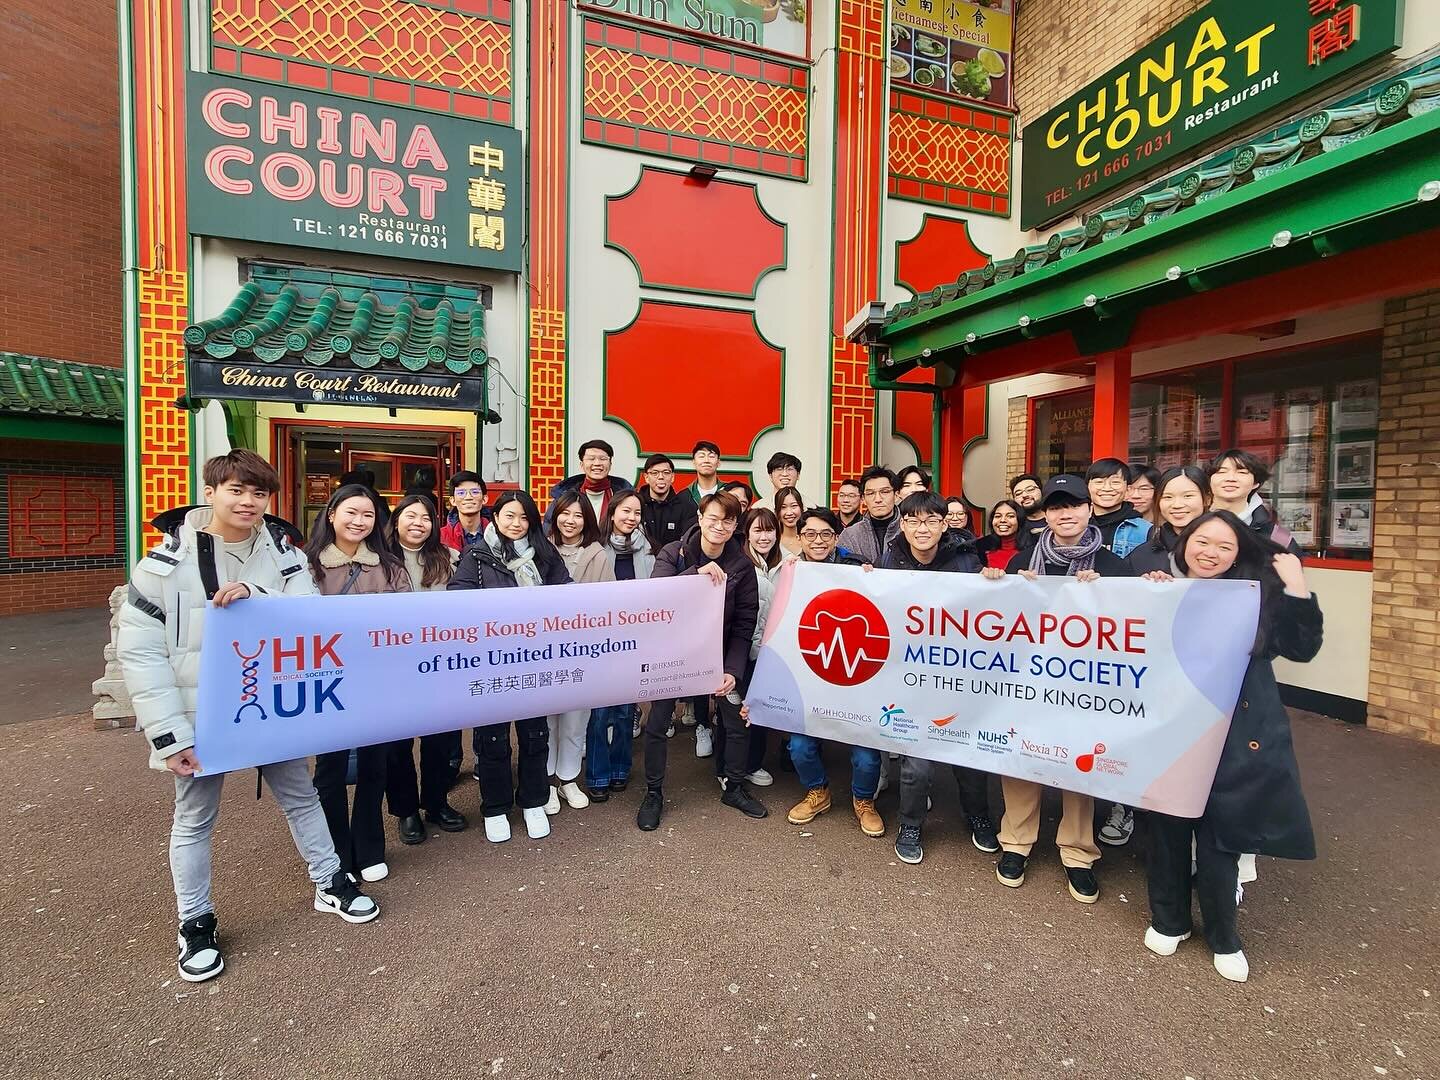 🇸🇬 x 🇭🇰
Last weekend, members from SMSUK and HKMSUK met up to kick off our first event of 2024 🤩 This is the second year in a row that our societies have hosted a collaborative event! This year, we went to China Court in Birmingham for the heart